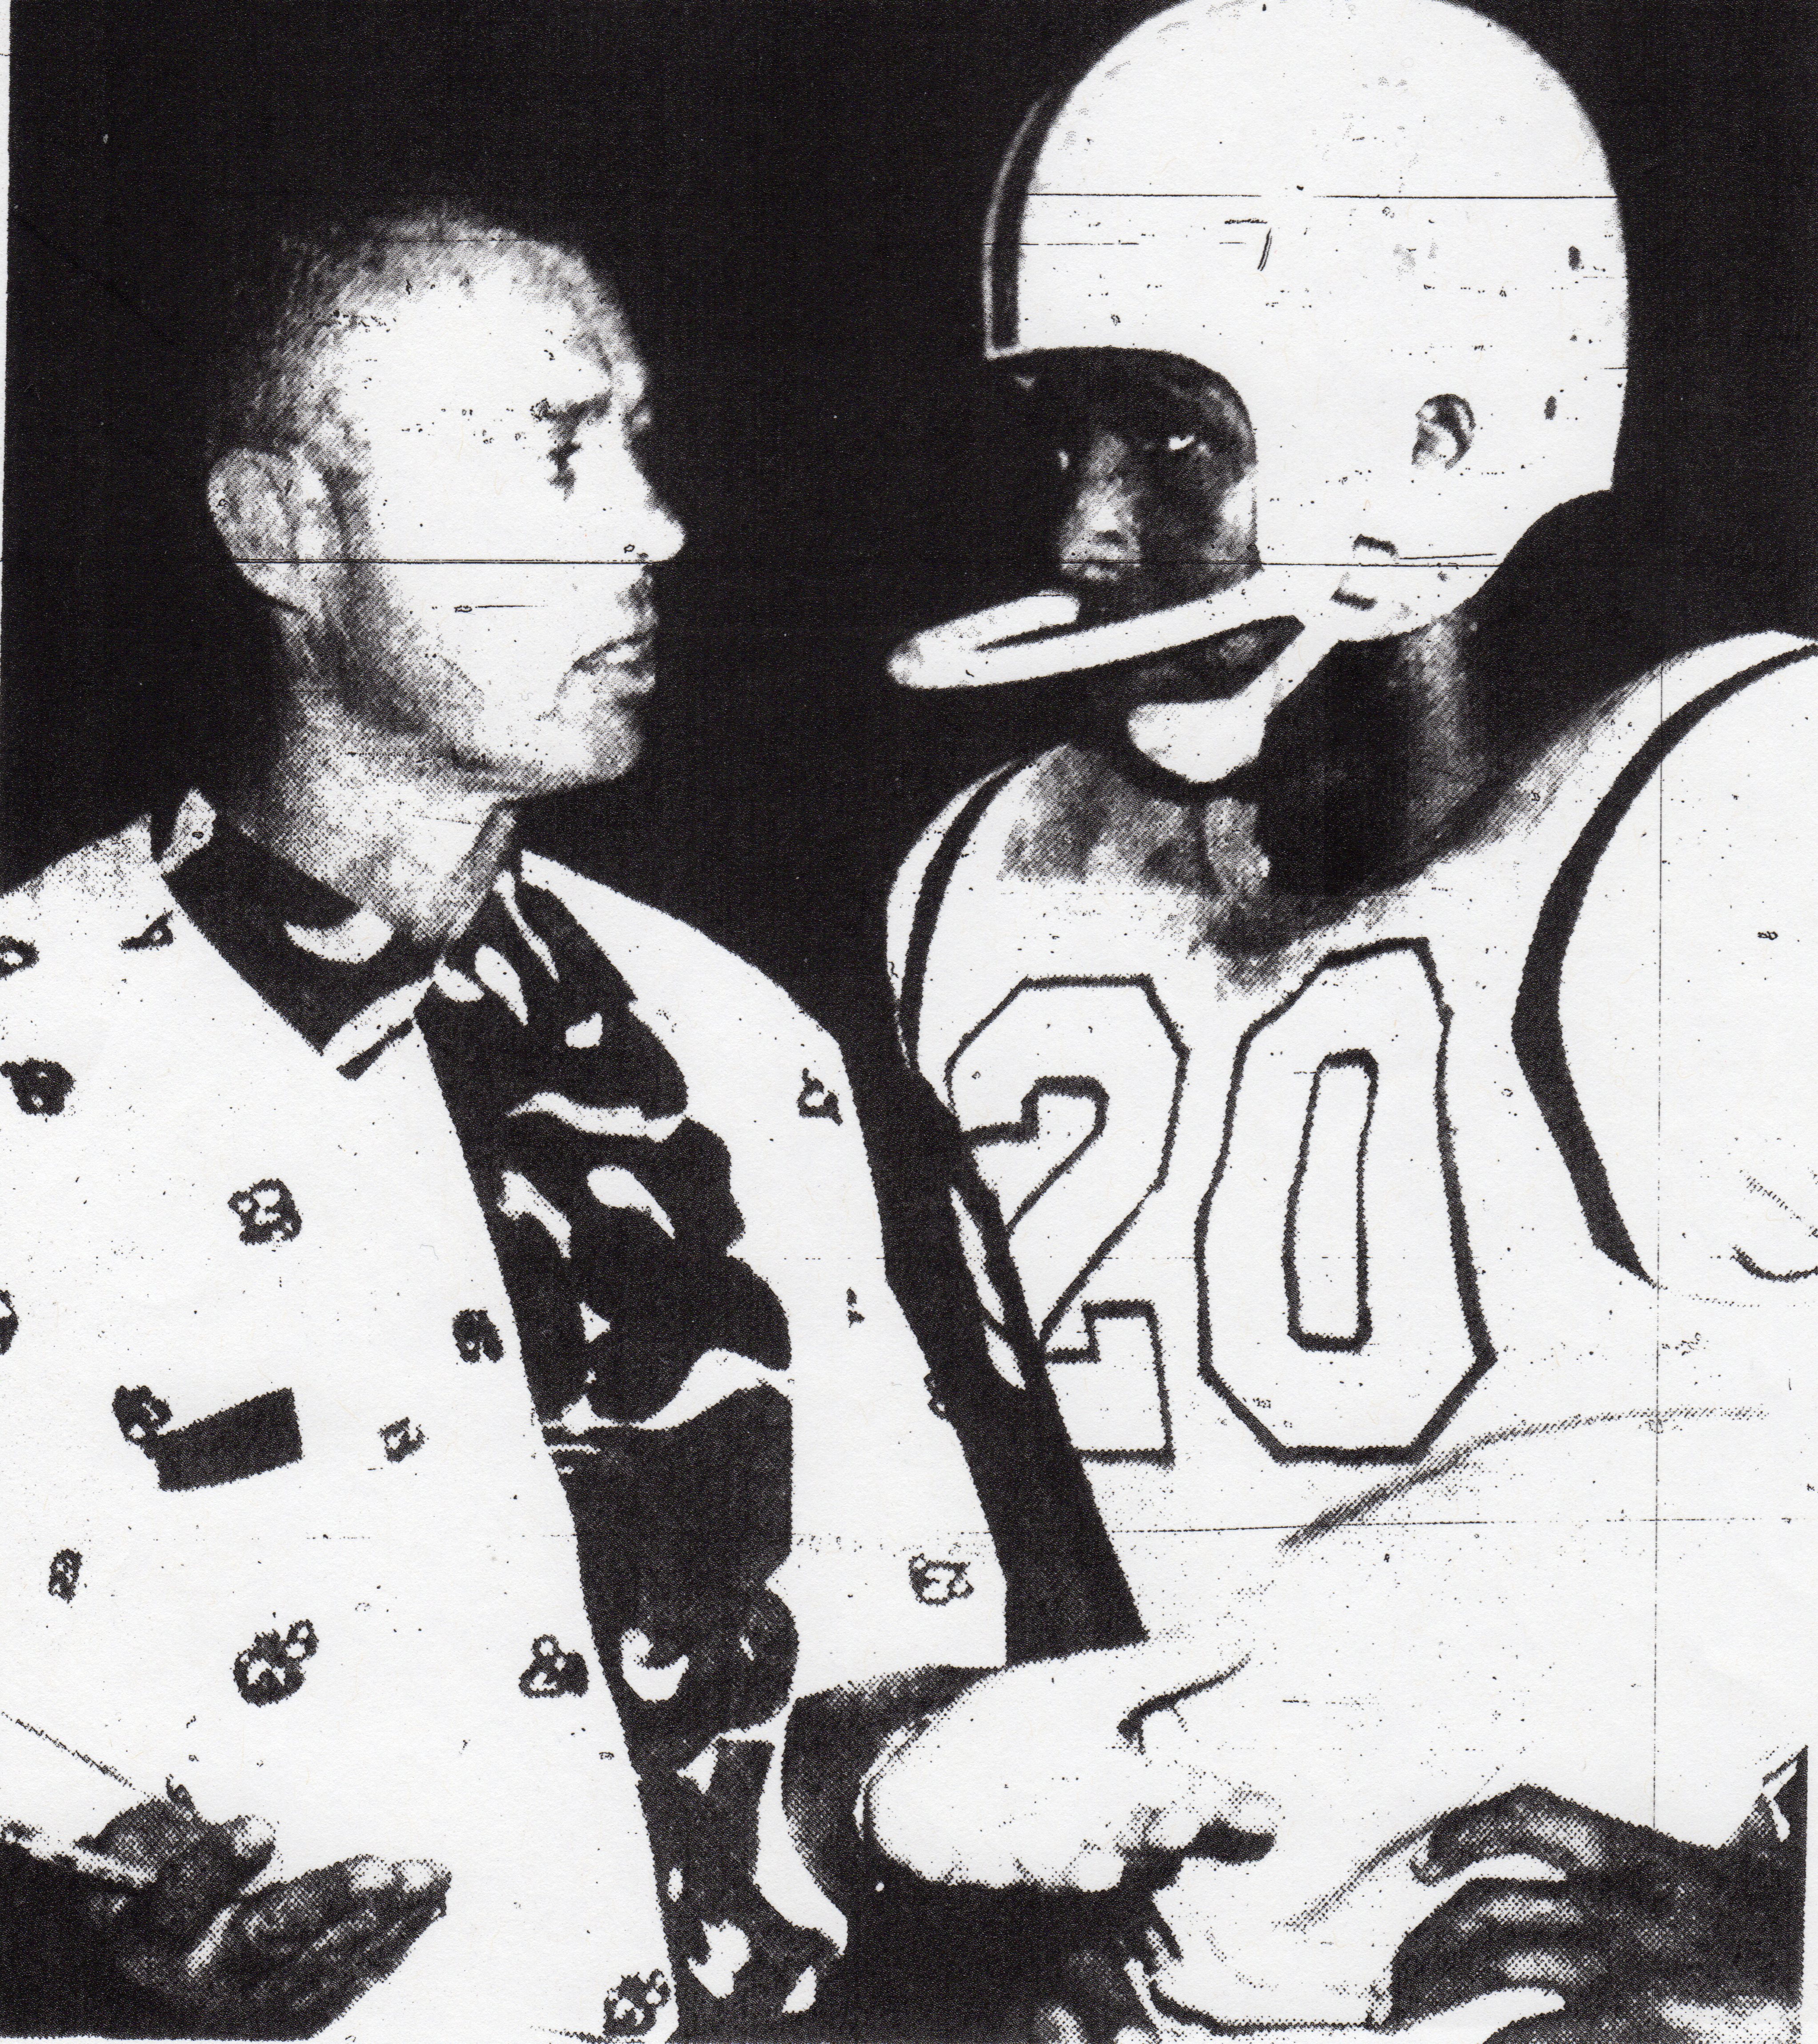 Maley and quarterback Ezell Singleton were a great team. Cavemen were 21-2 in 1958 and '58 seasons.